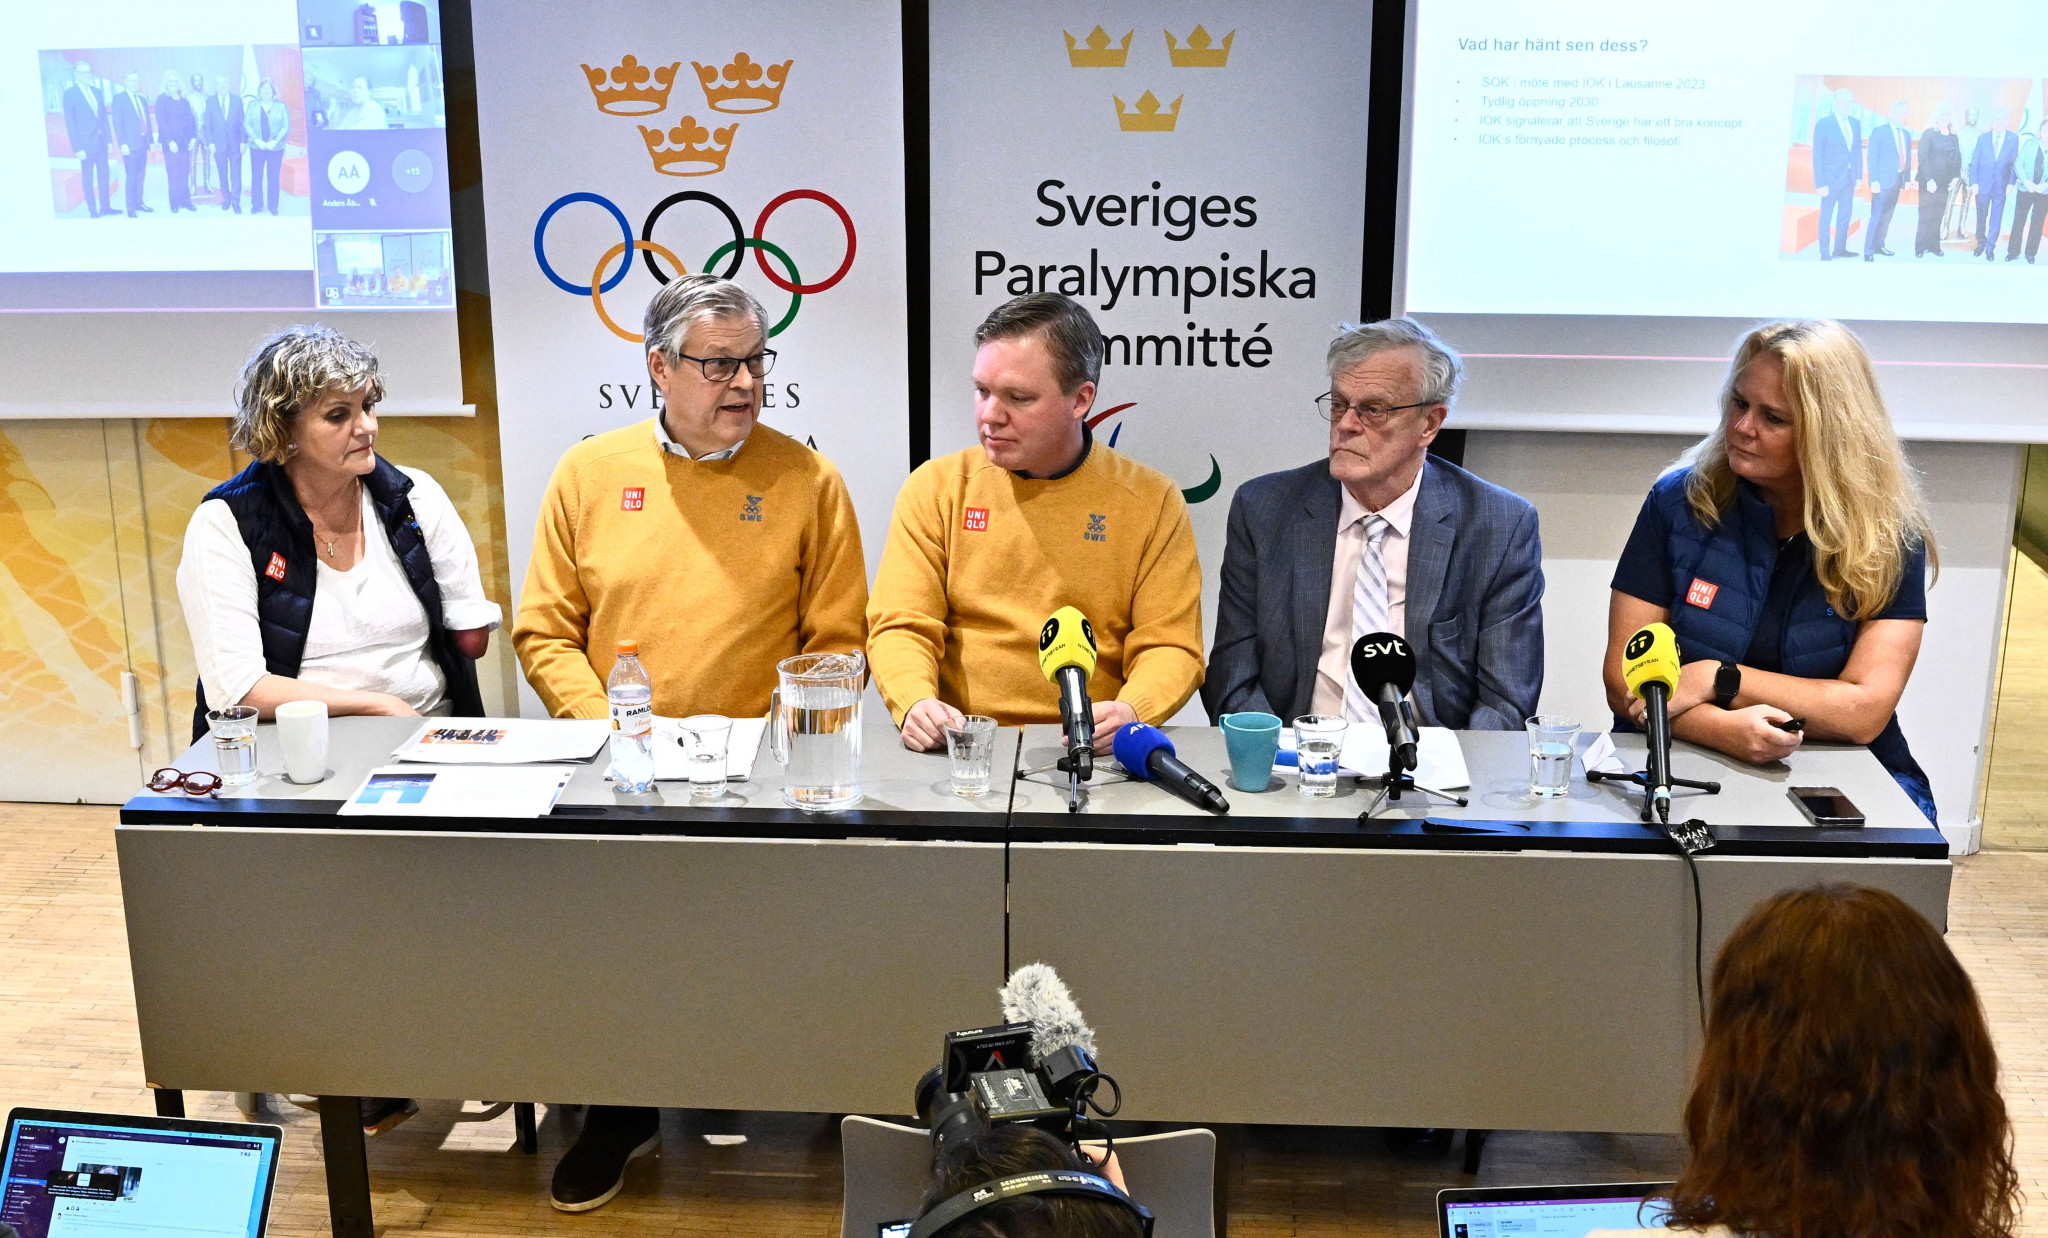 Sweden is one of the countries interested in staging the 2030 Winter Olympics ©Getty Images